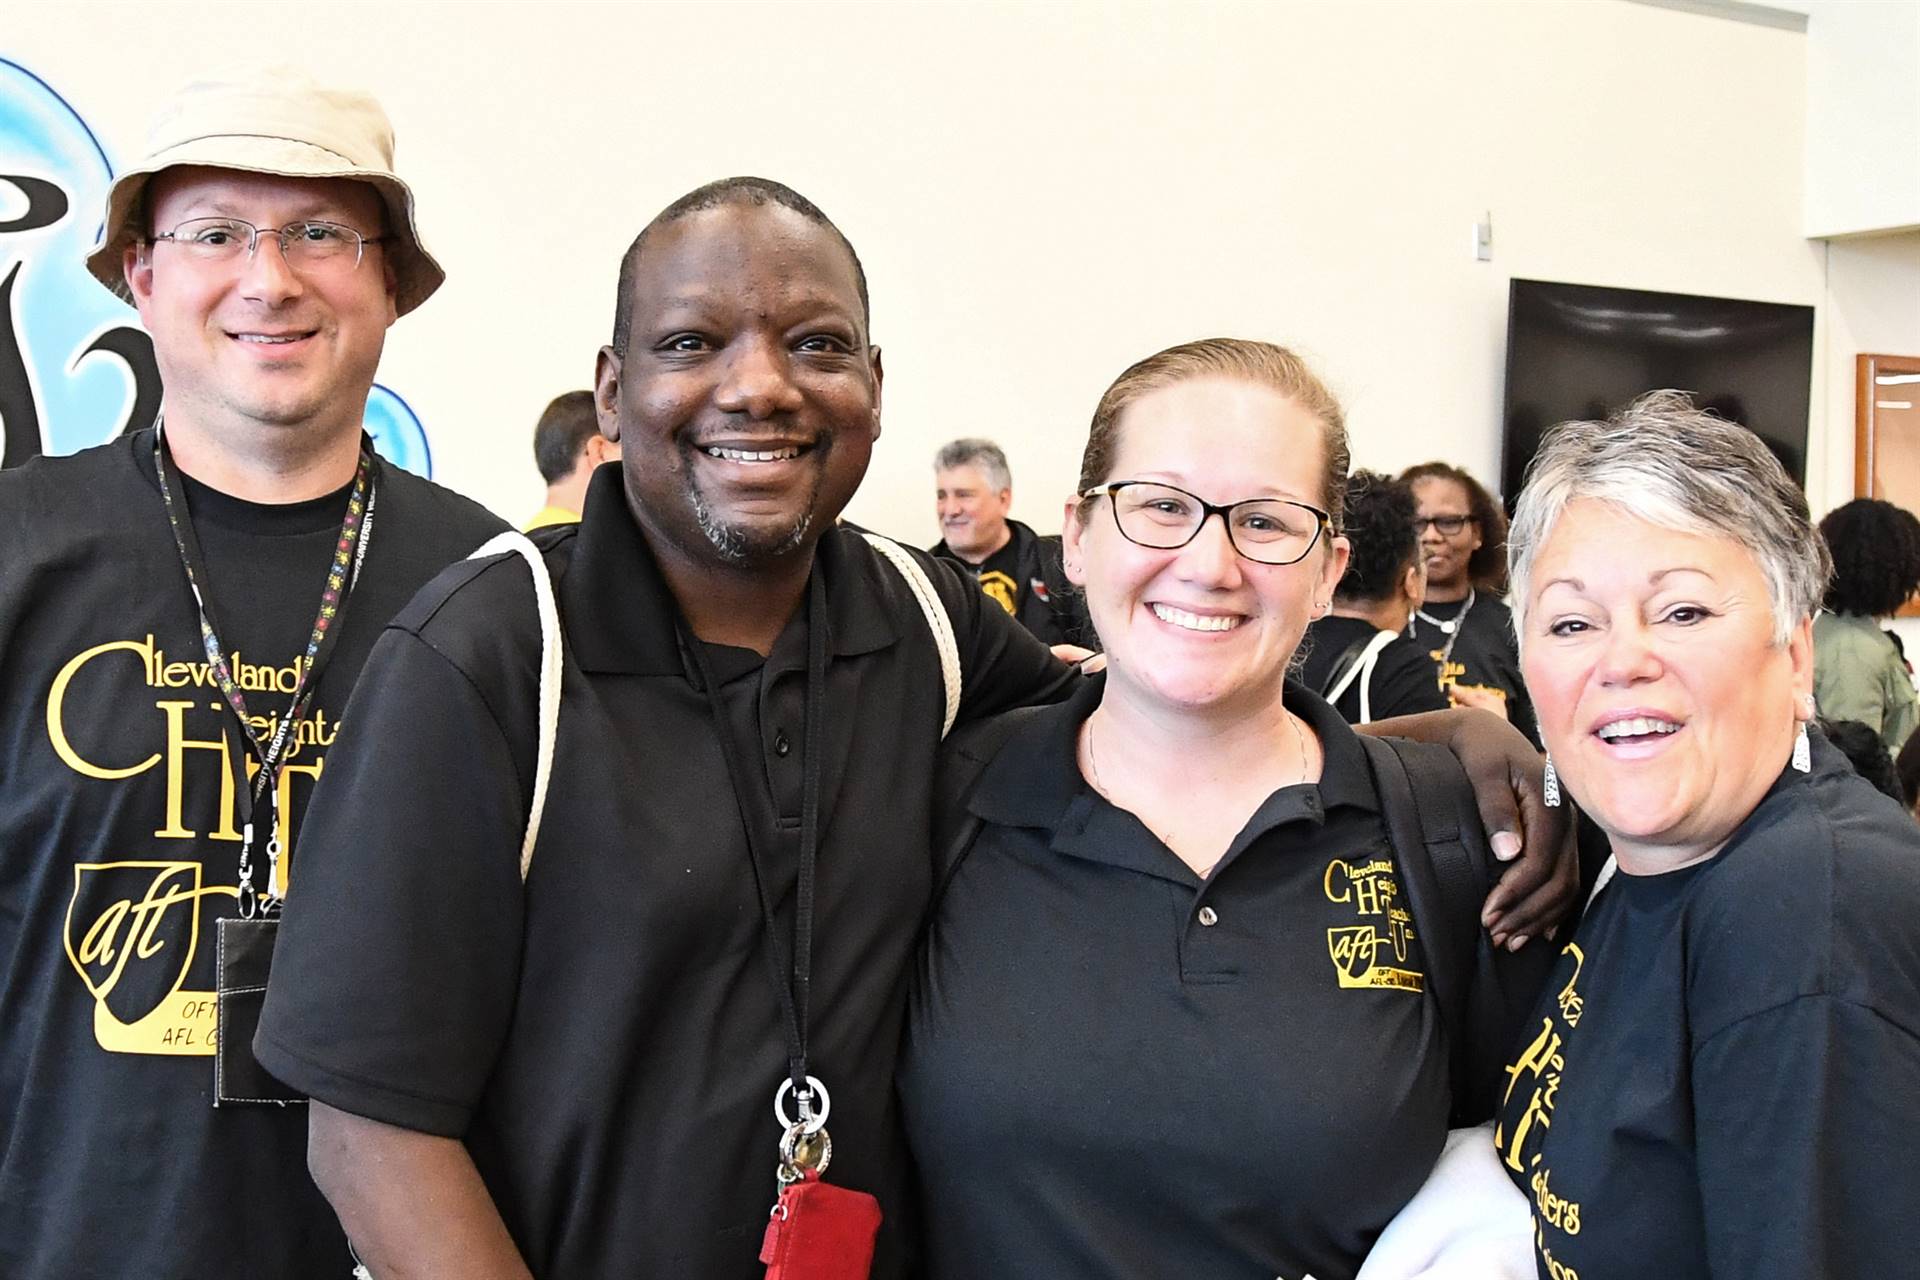 Four staff members smiling